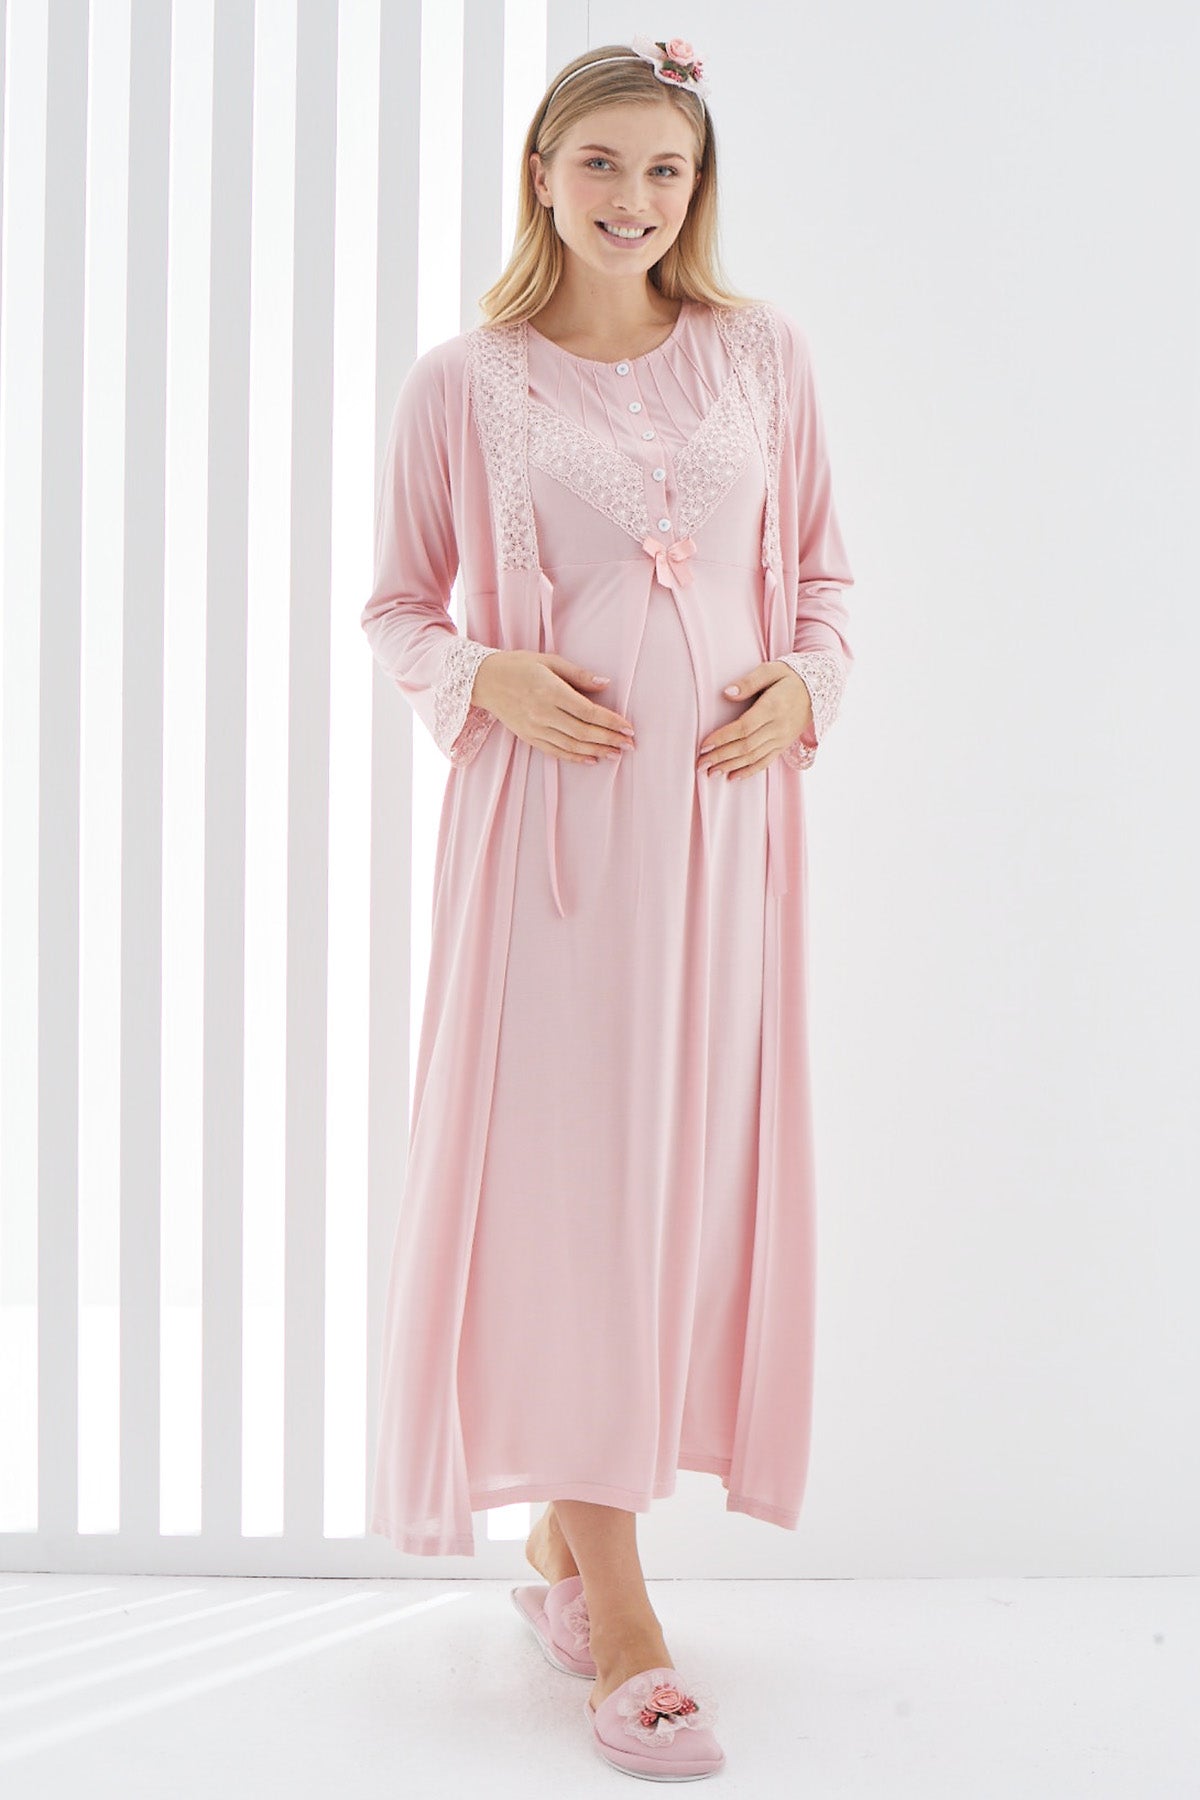 Shopymommy 2270 Lace Detailed Maternity & Nursing Nightgown With Robe Powder